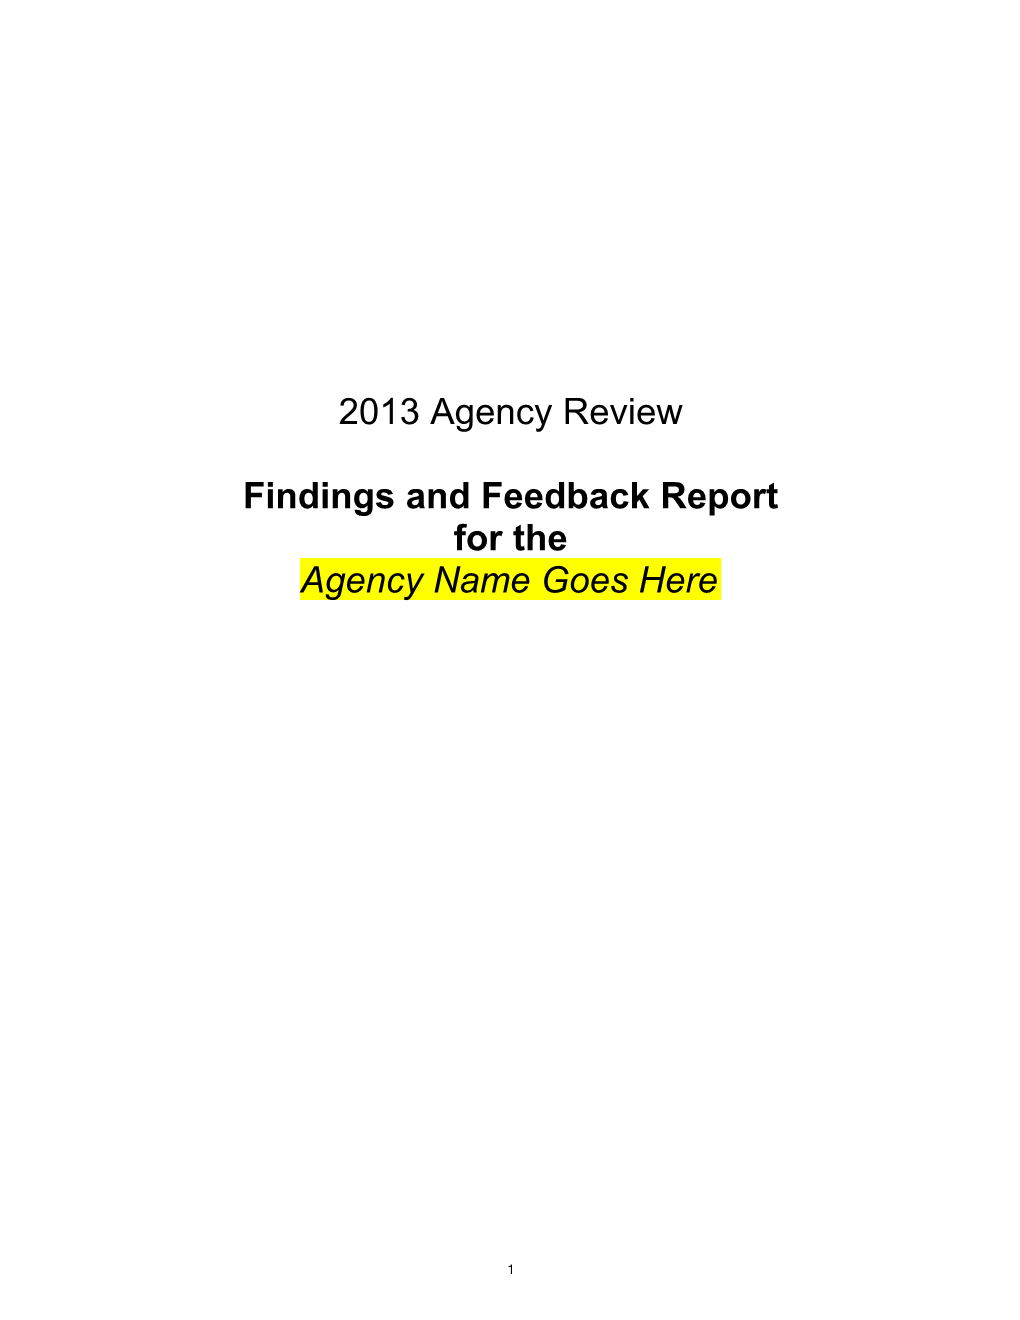 Findings and Feedback Report